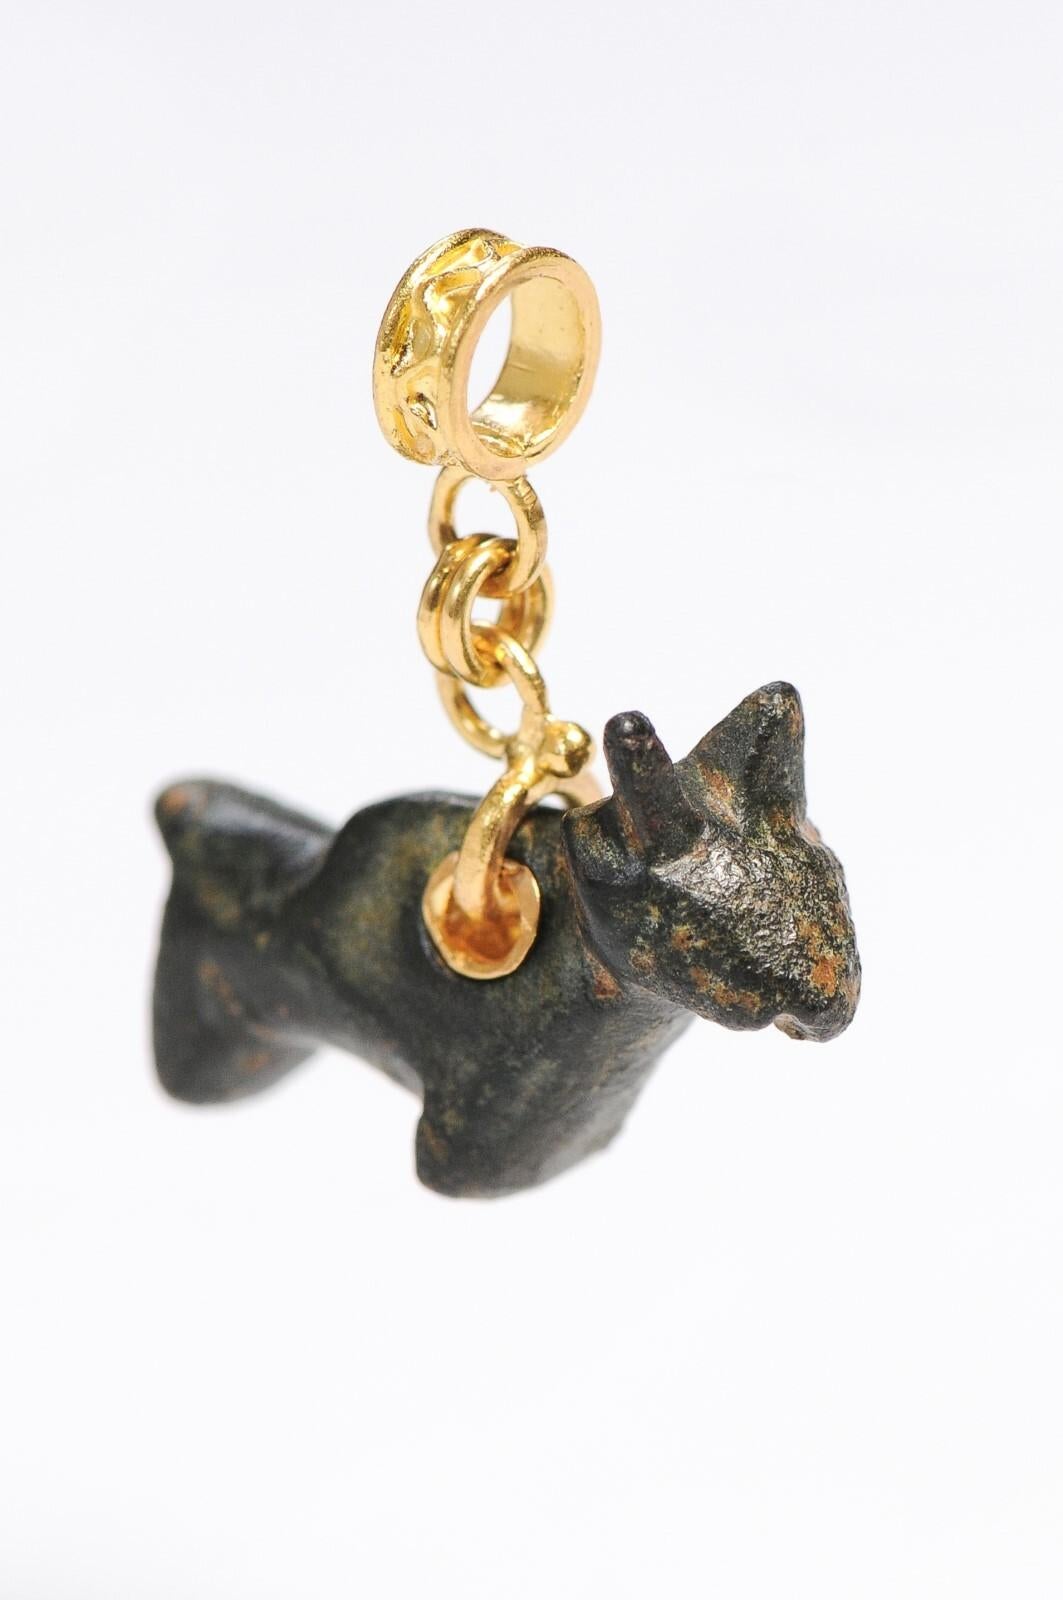 A bronze Roman bull made into a pendant trimmed with 21K gold. This ancient bronze figurine was turned into a pendant by an artisan jeweler - it is unique and one of kind!  Measurements: 13/16